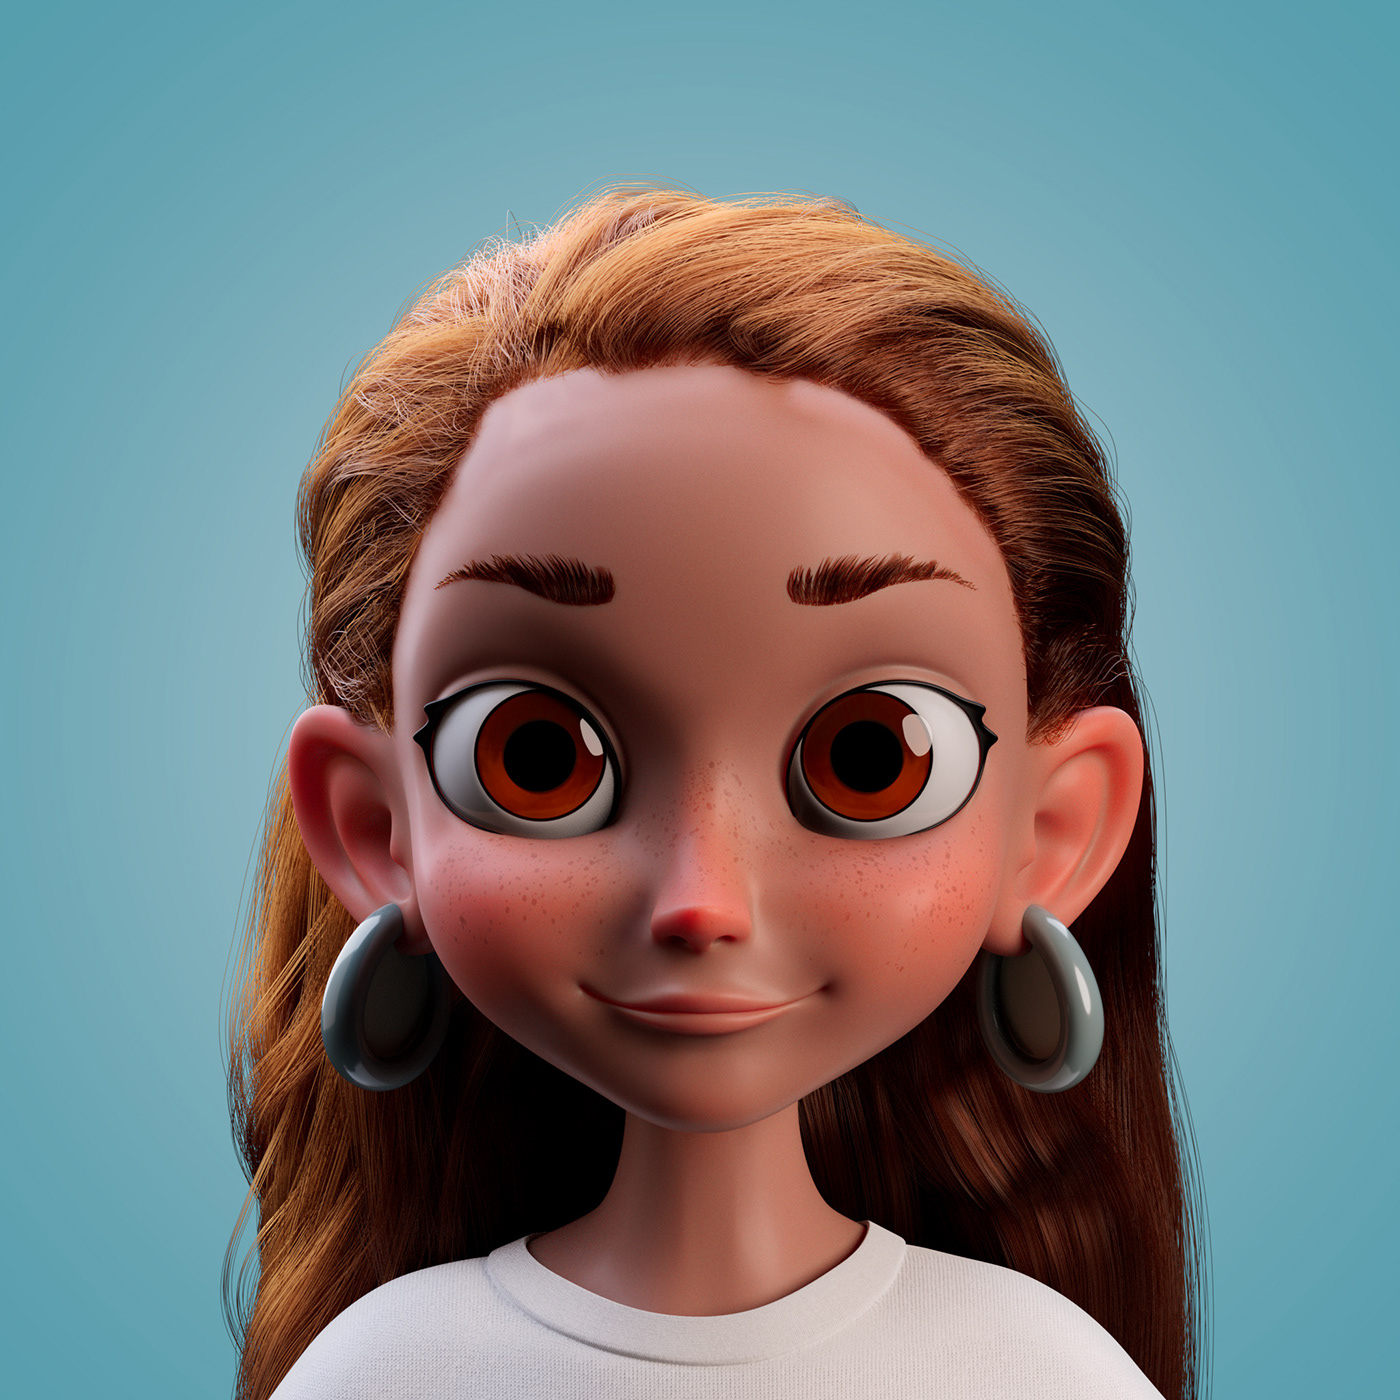 3D 3D Character 3d modeling character modeling digital 3d cute girl texturing cloth modeling hair style stylized modeling